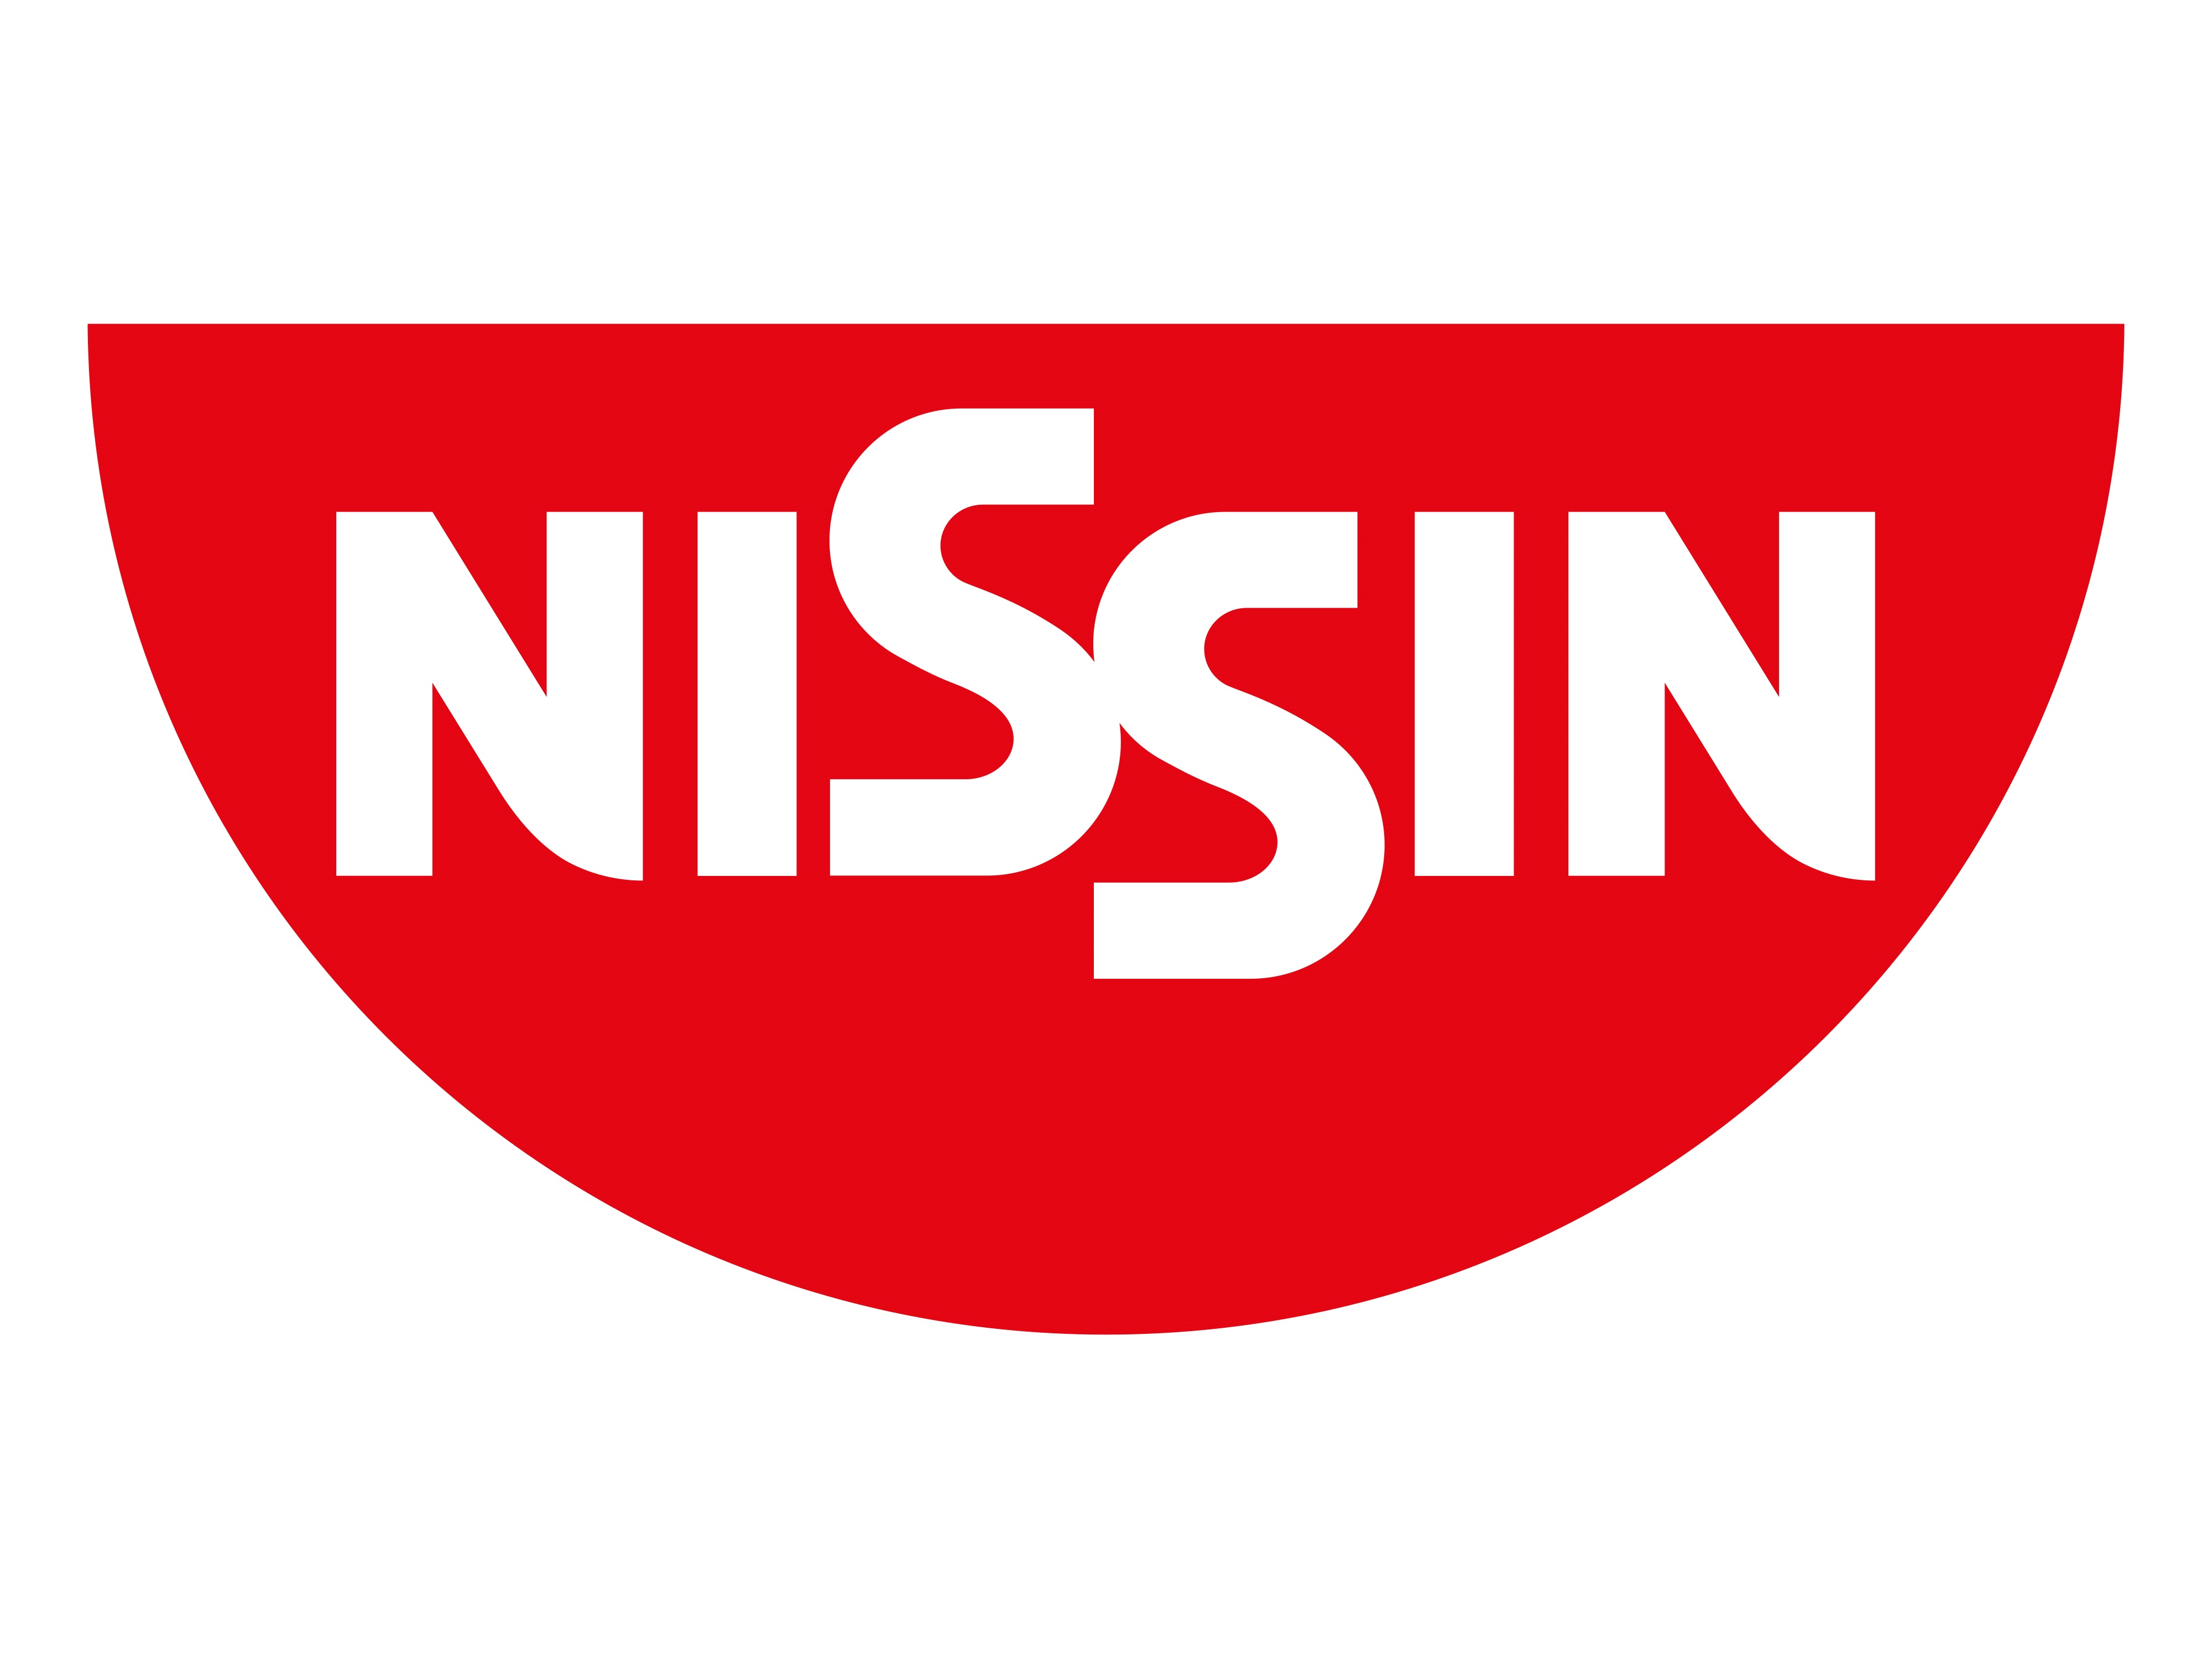 JPG: White Background
© 2019, Nissin Food Products, Co., Ltd.
All Rights Reserved. Used under licence.